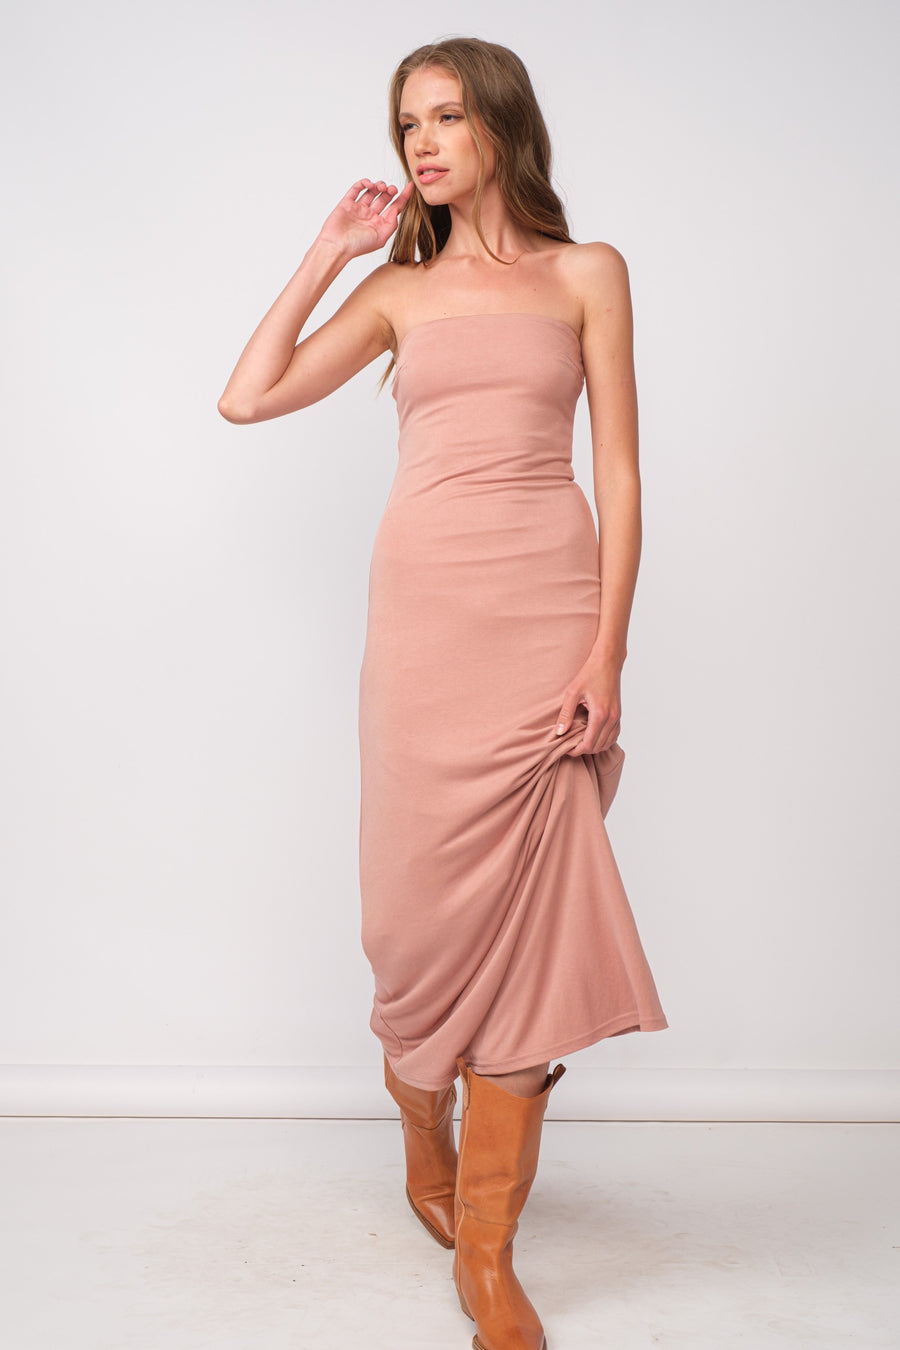 Strapless maxi dress in the color French coco.